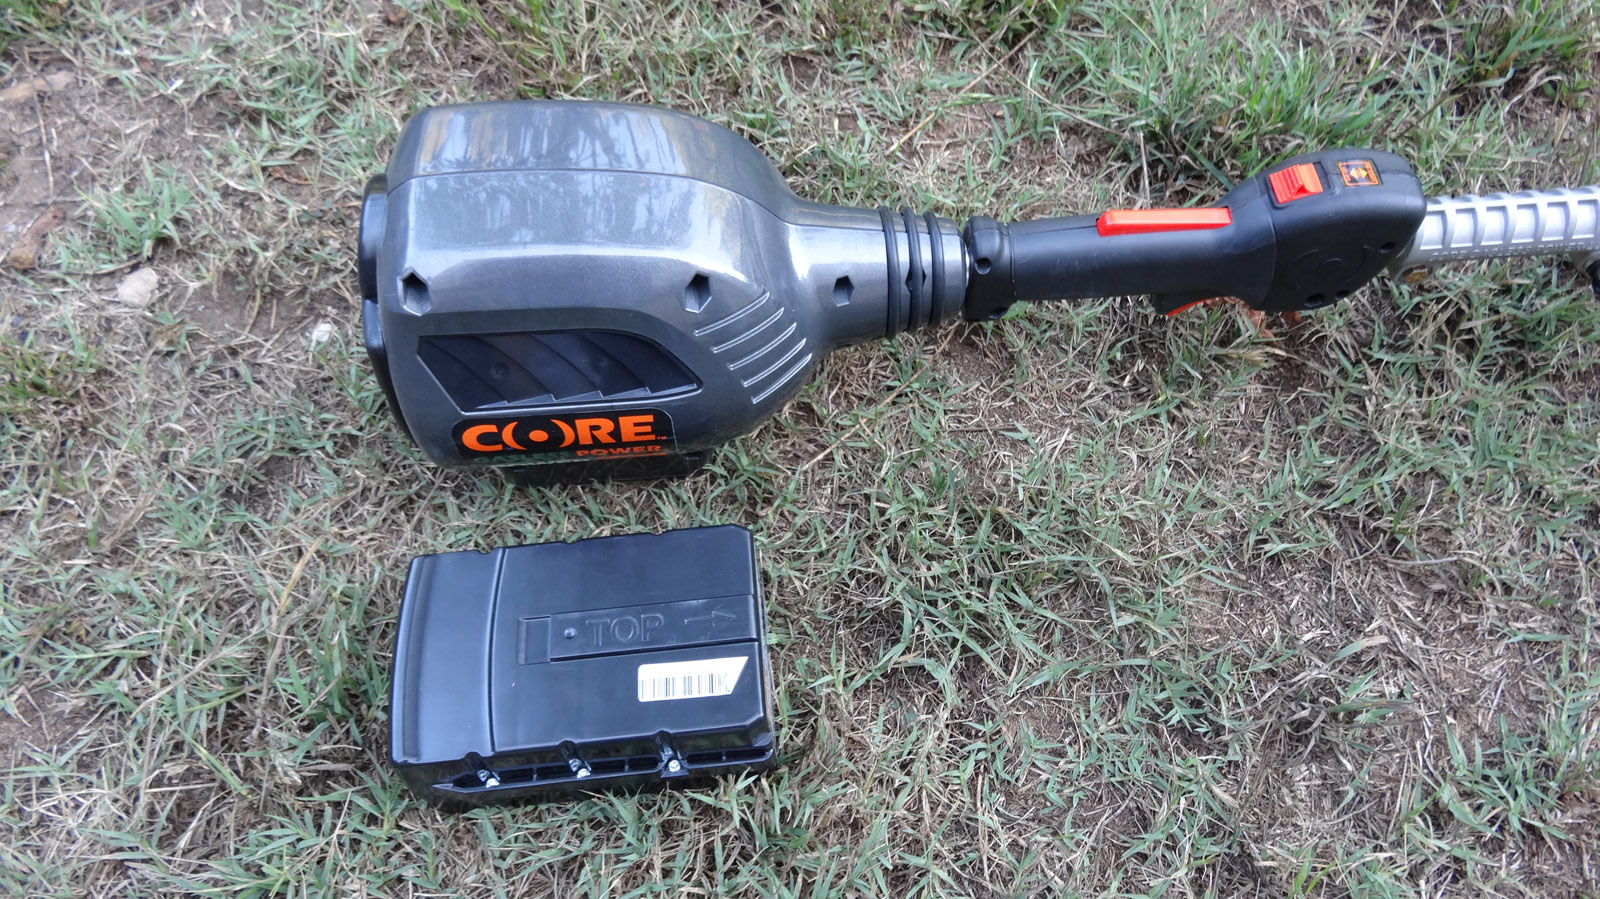 Core CGT400 Trimmer Review: This Electric Trimmer Is A Gas